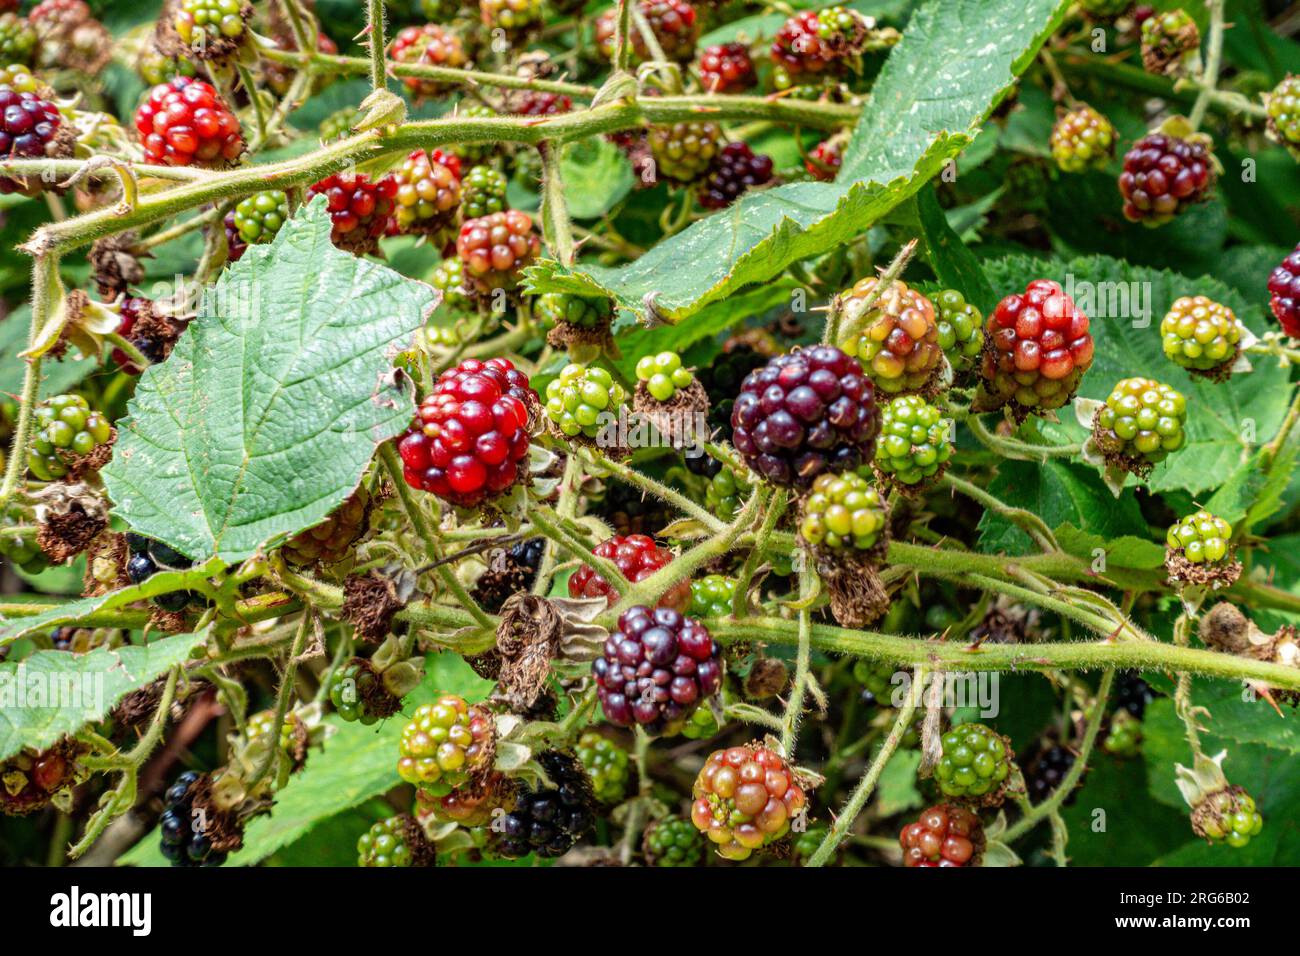 Wild blackberries on a bramble bush at different stages of ripeness growing outside Stock Photo